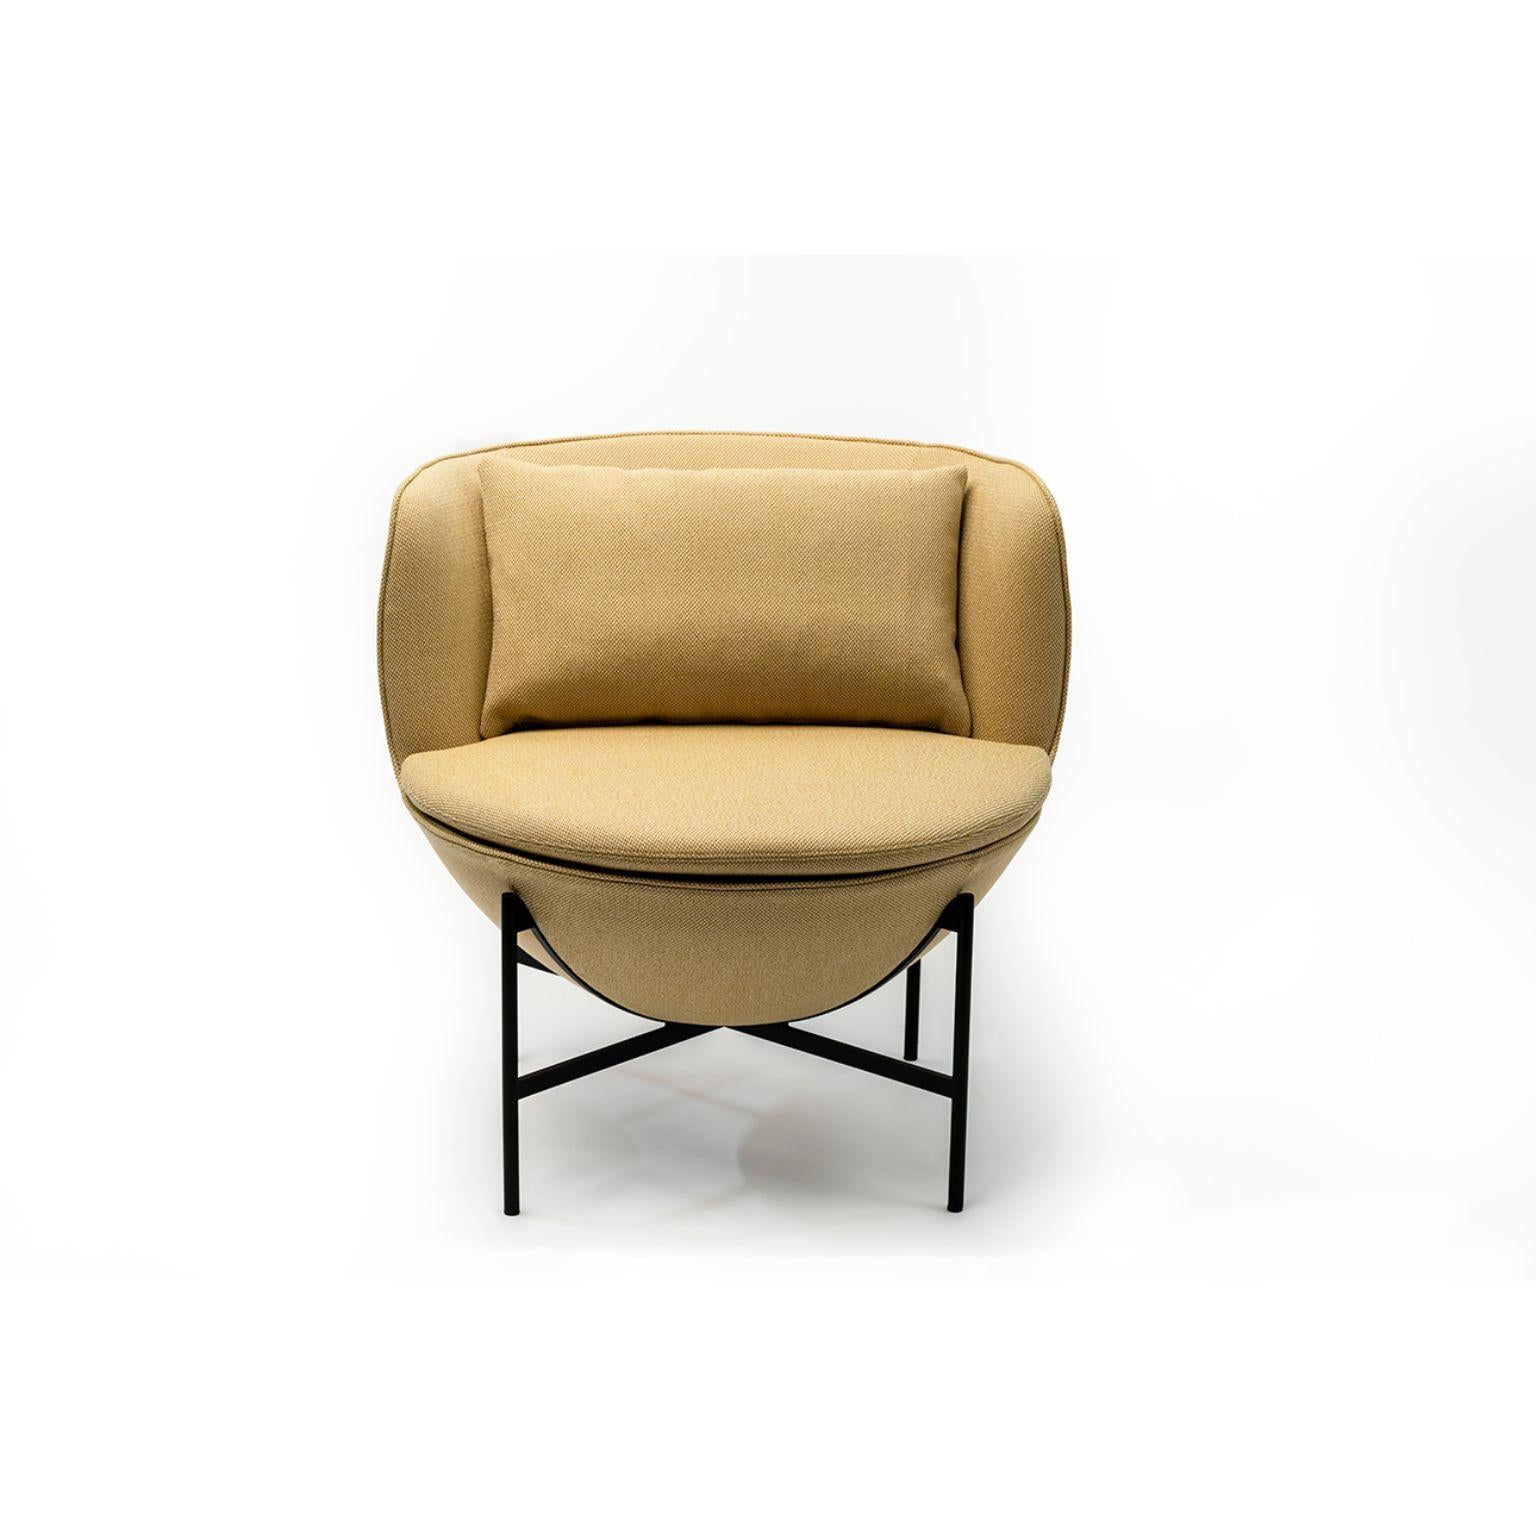 Calice armchair 4-leg base by Patrick Norguet.
Materials: Upholstery: Fabric also available in leather
Structure: Black powder-coated metal or matte champagne and black chrome 
Dimensions: W 72.8 x D70.7 x H 71.6 cm
 HS 43.7 cm

The Calice